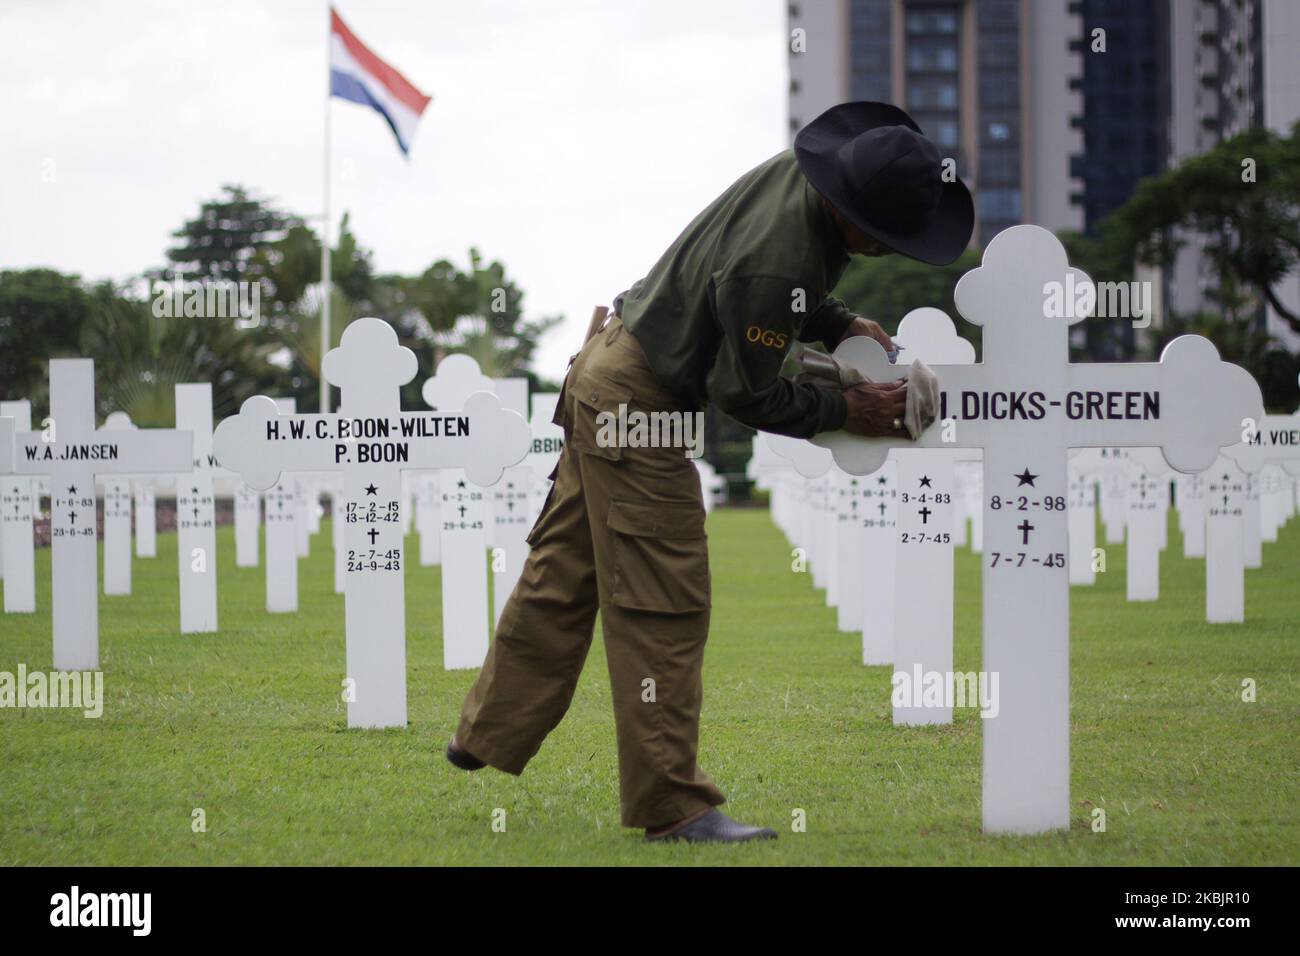 Preparation at Ereveld Dutch Heros Cemetery, Jakarta, before the arrived the King and Queen of Dutch, King Willem-Alexander and Queen Maxima at the first day of they state visit to Indonesia on March 10, 2020. during his visit, the Dutch King Willem-Alexander conveyed the apology over 'excessive violance' suffered by Indonesians in the eraly years of Indonesia independence, acknowledging the period as a 'painfull separation'. (Photo by Aditya Irawan/NurPhoto) Stock Photo